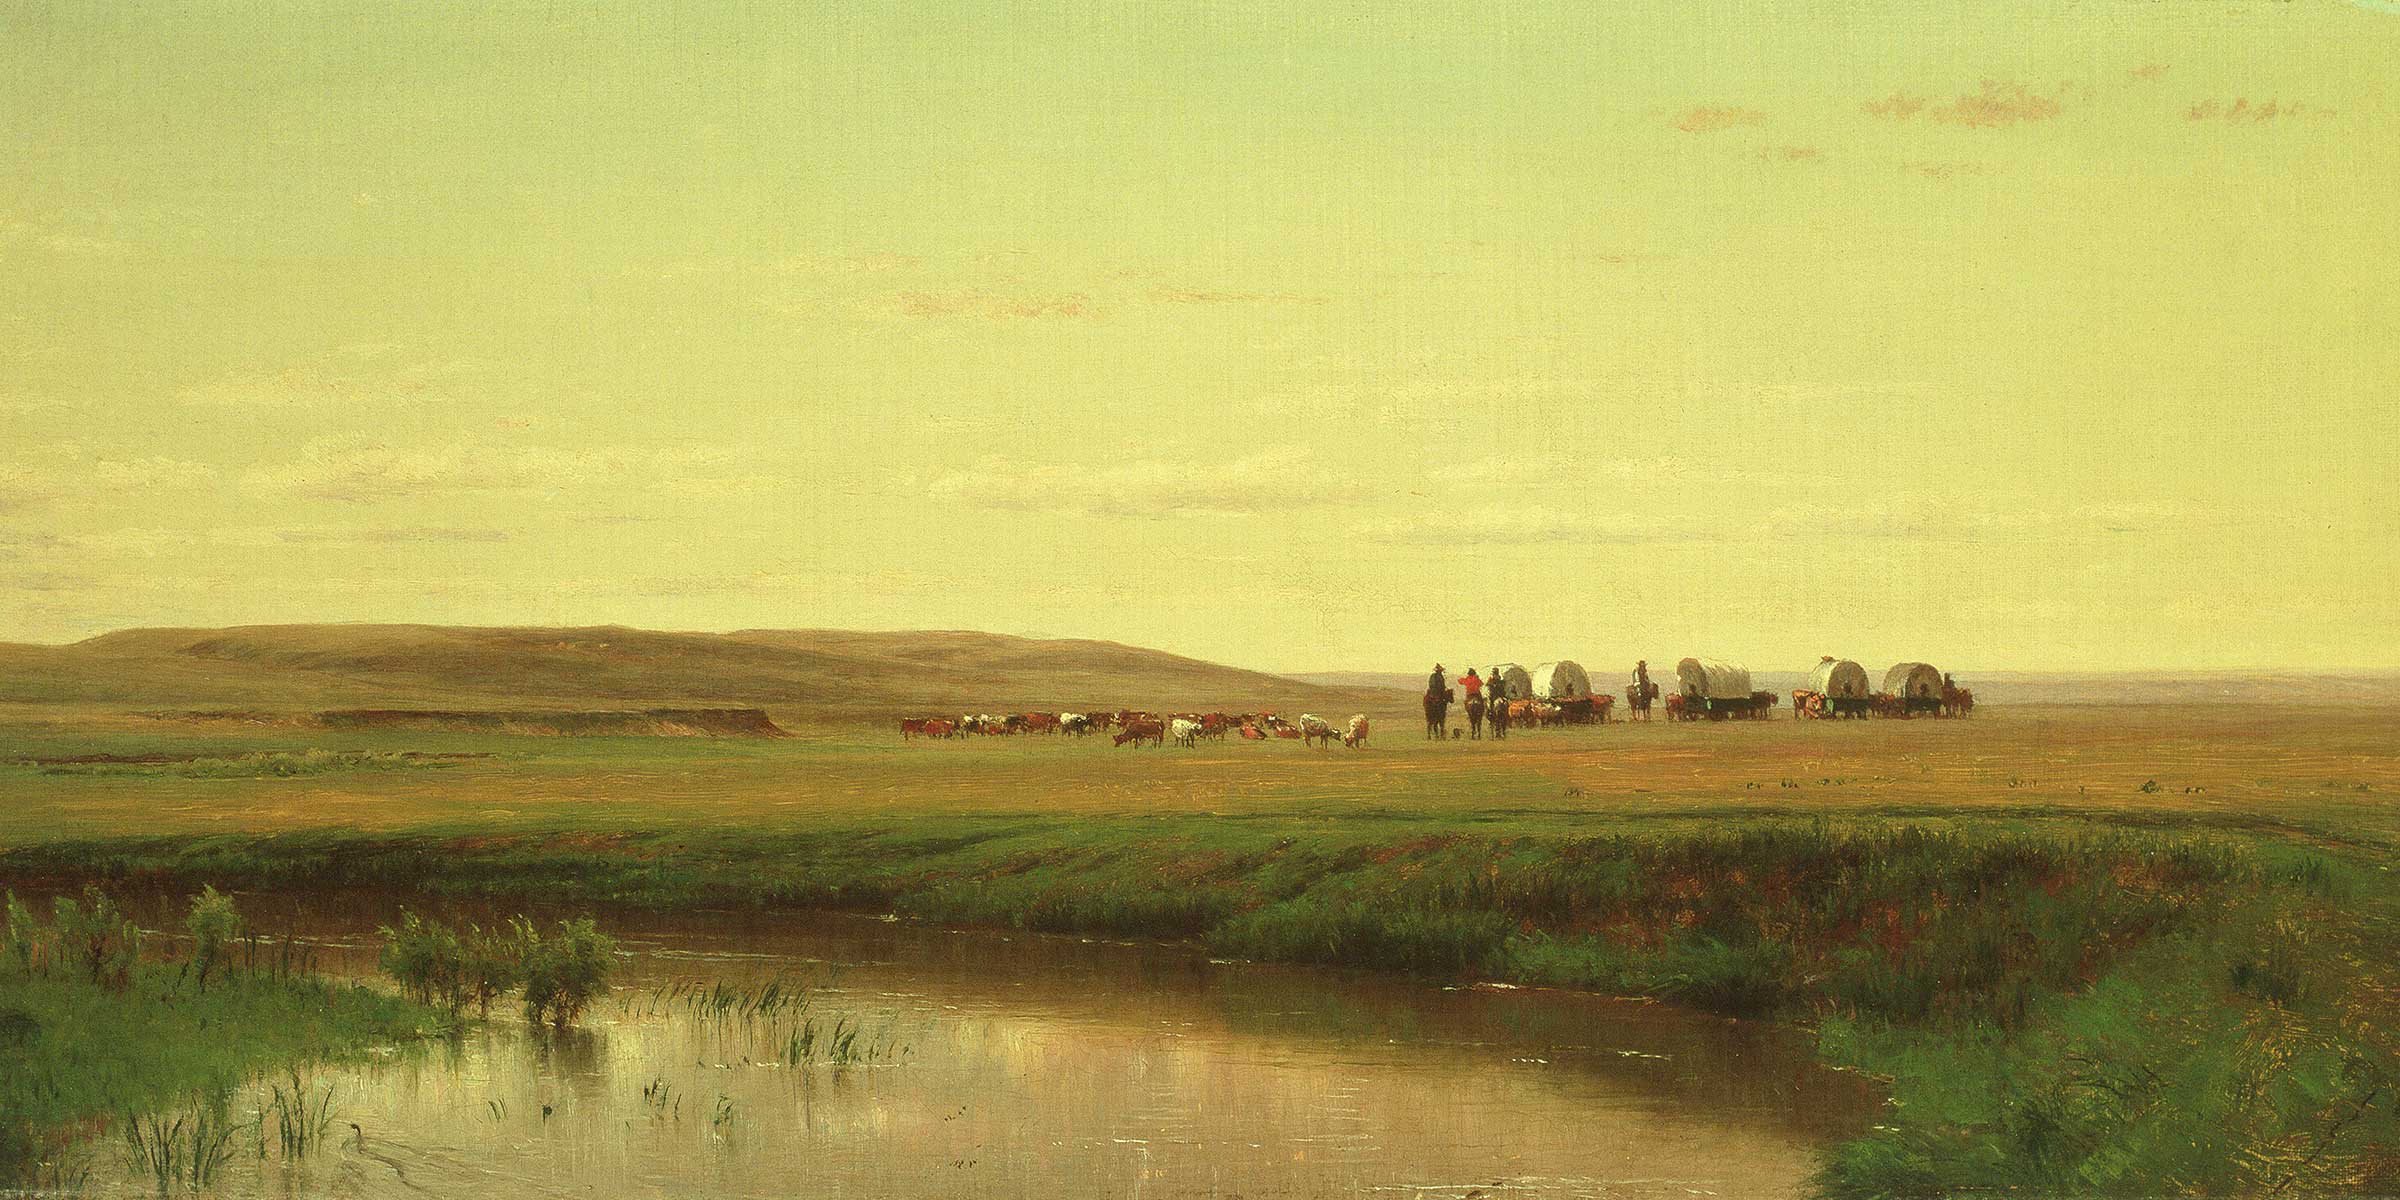 Painting of a riverbank in front of four wagons followed by animals on an open plain